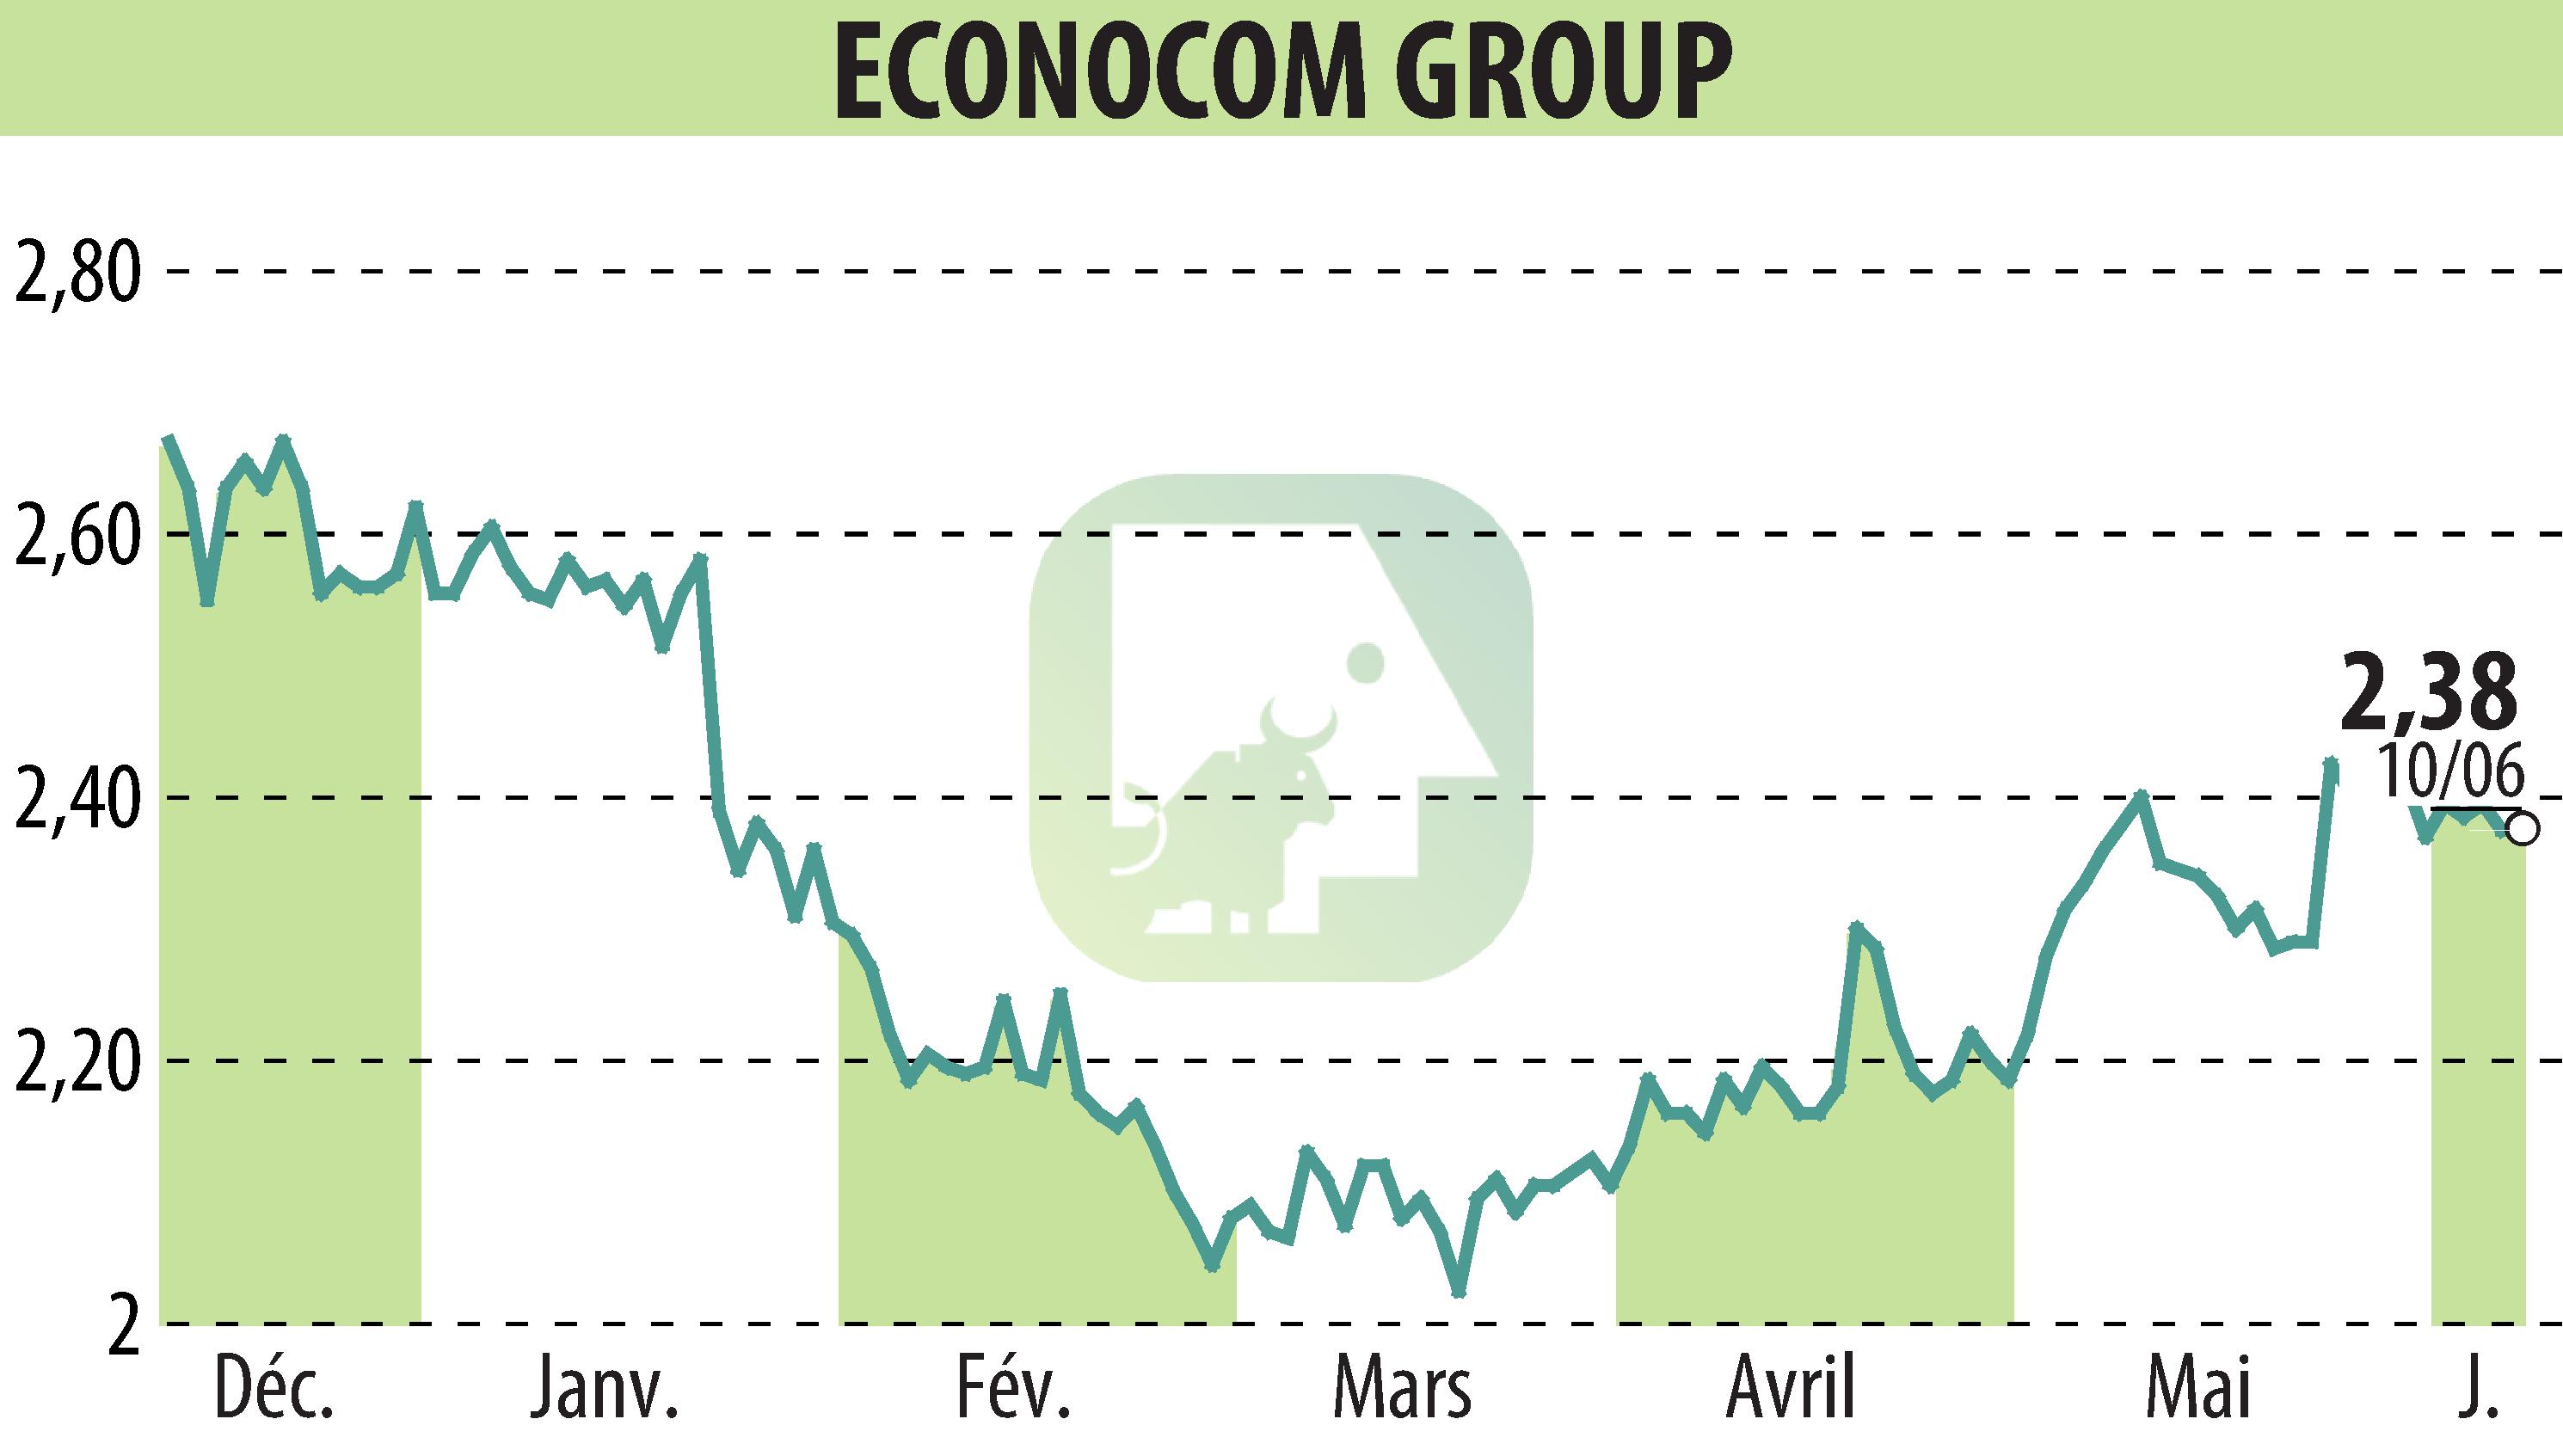 Stock price chart of ECONOCOM GROUP (EBR:ECONB) showing fluctuations.